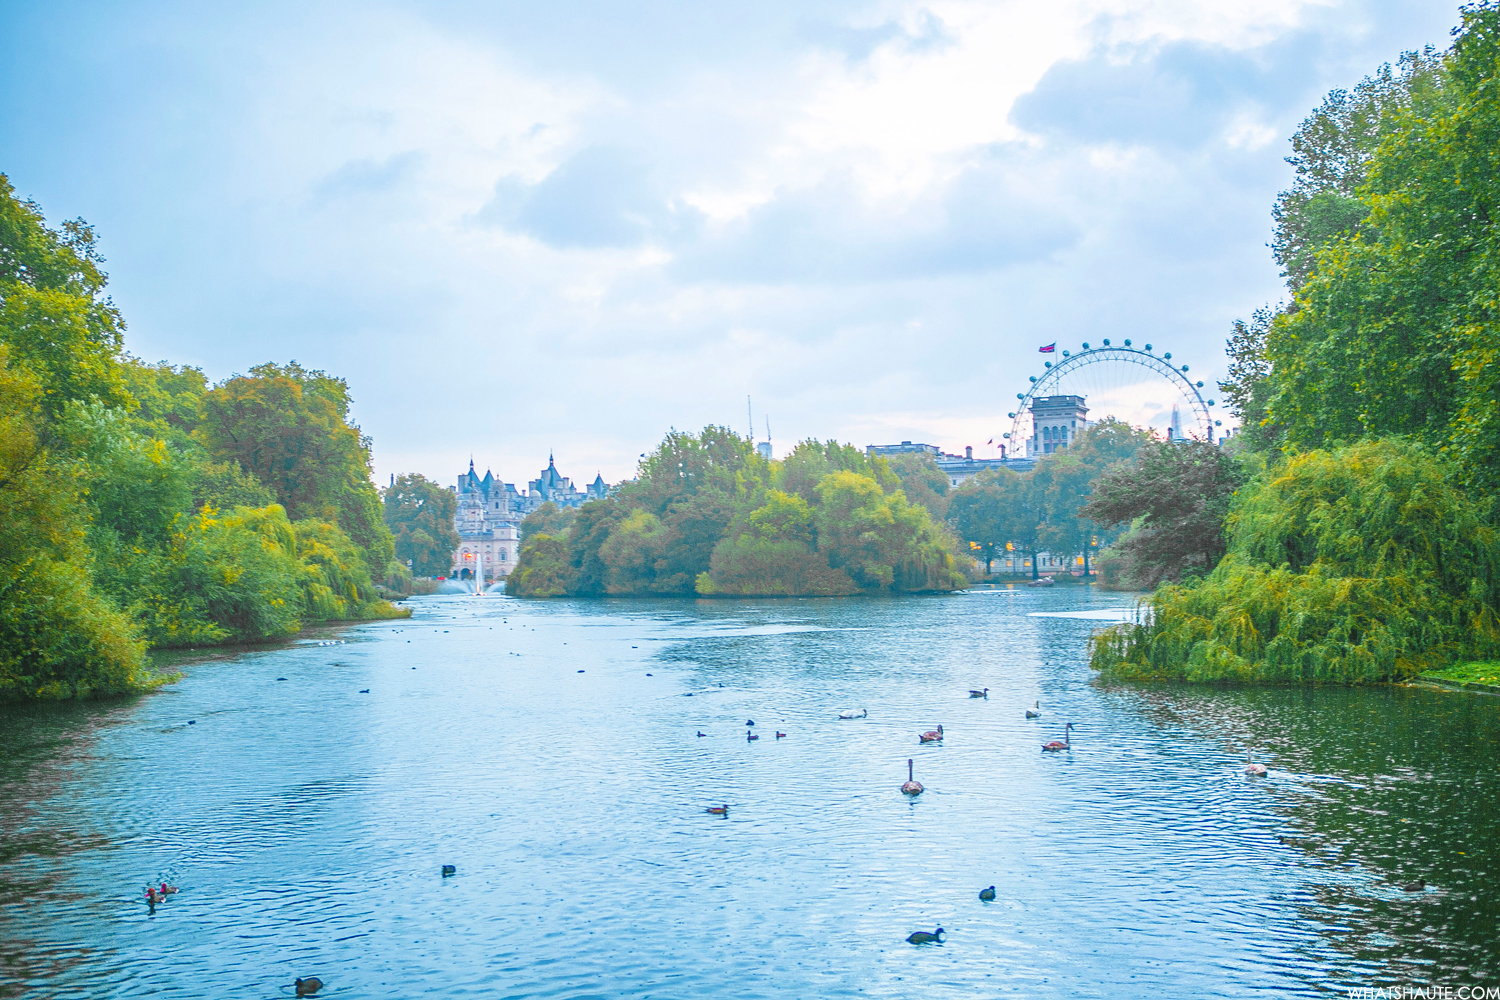 St. James's Park - London, England, What's Haute in the World